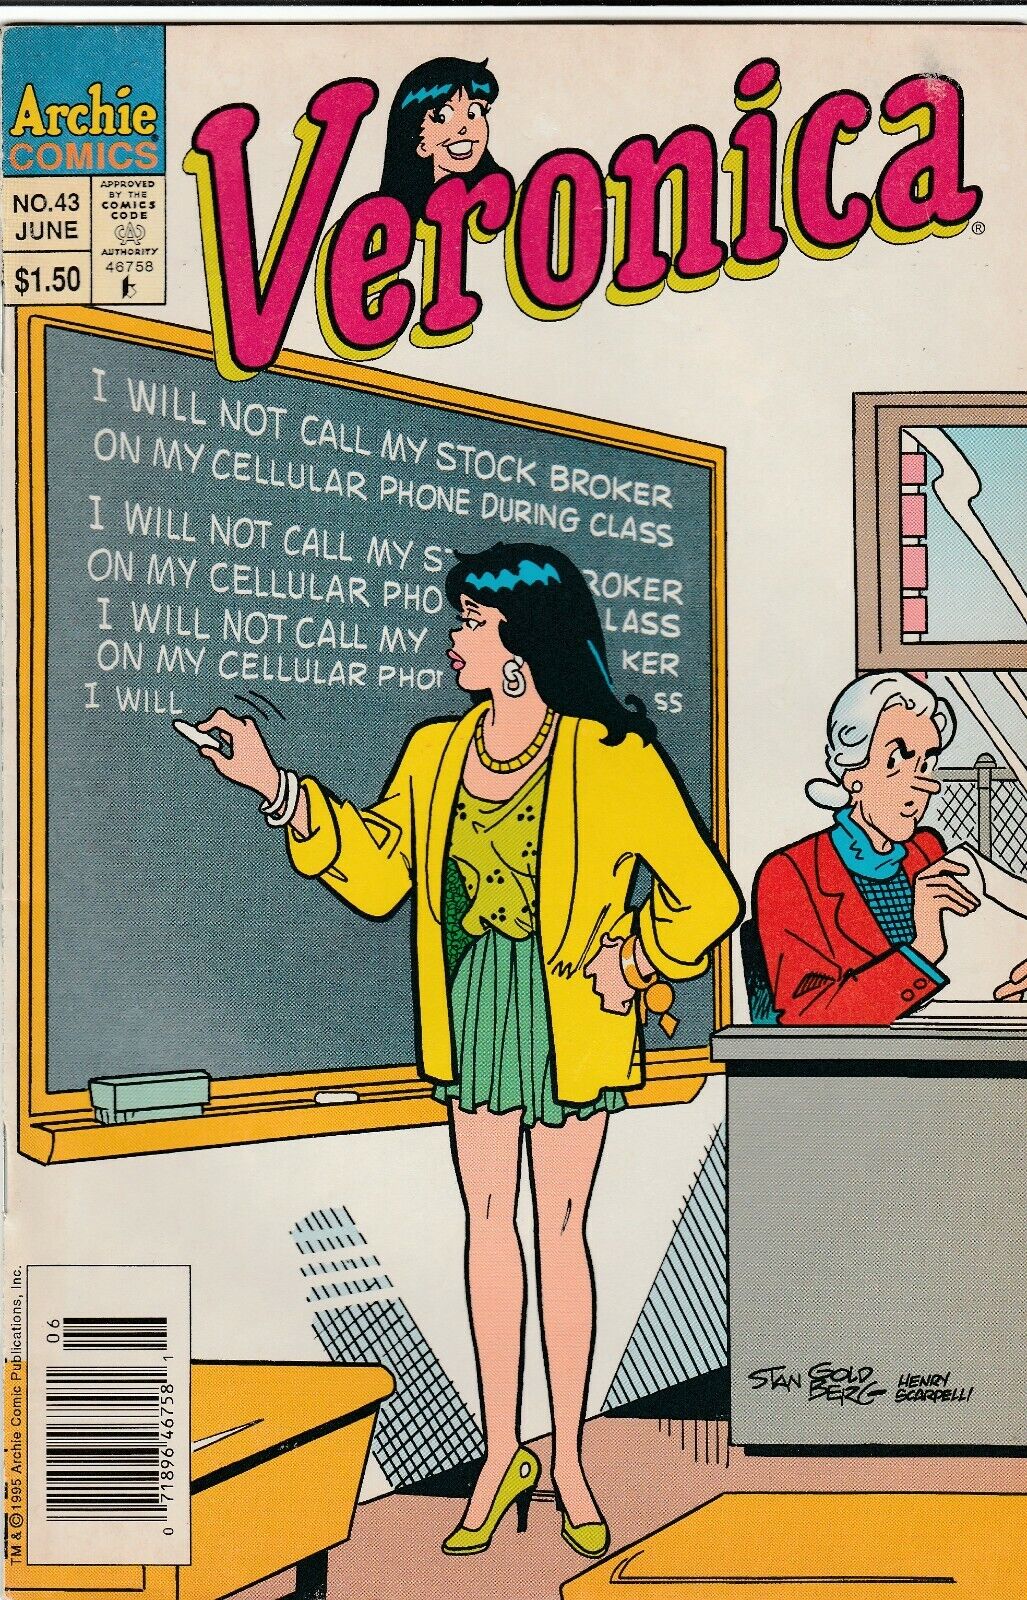 VERONICA # 43 NEWSTAND  ARCHIE  BETTY  1989 DAN DECARLO  .99 AUCTIONS